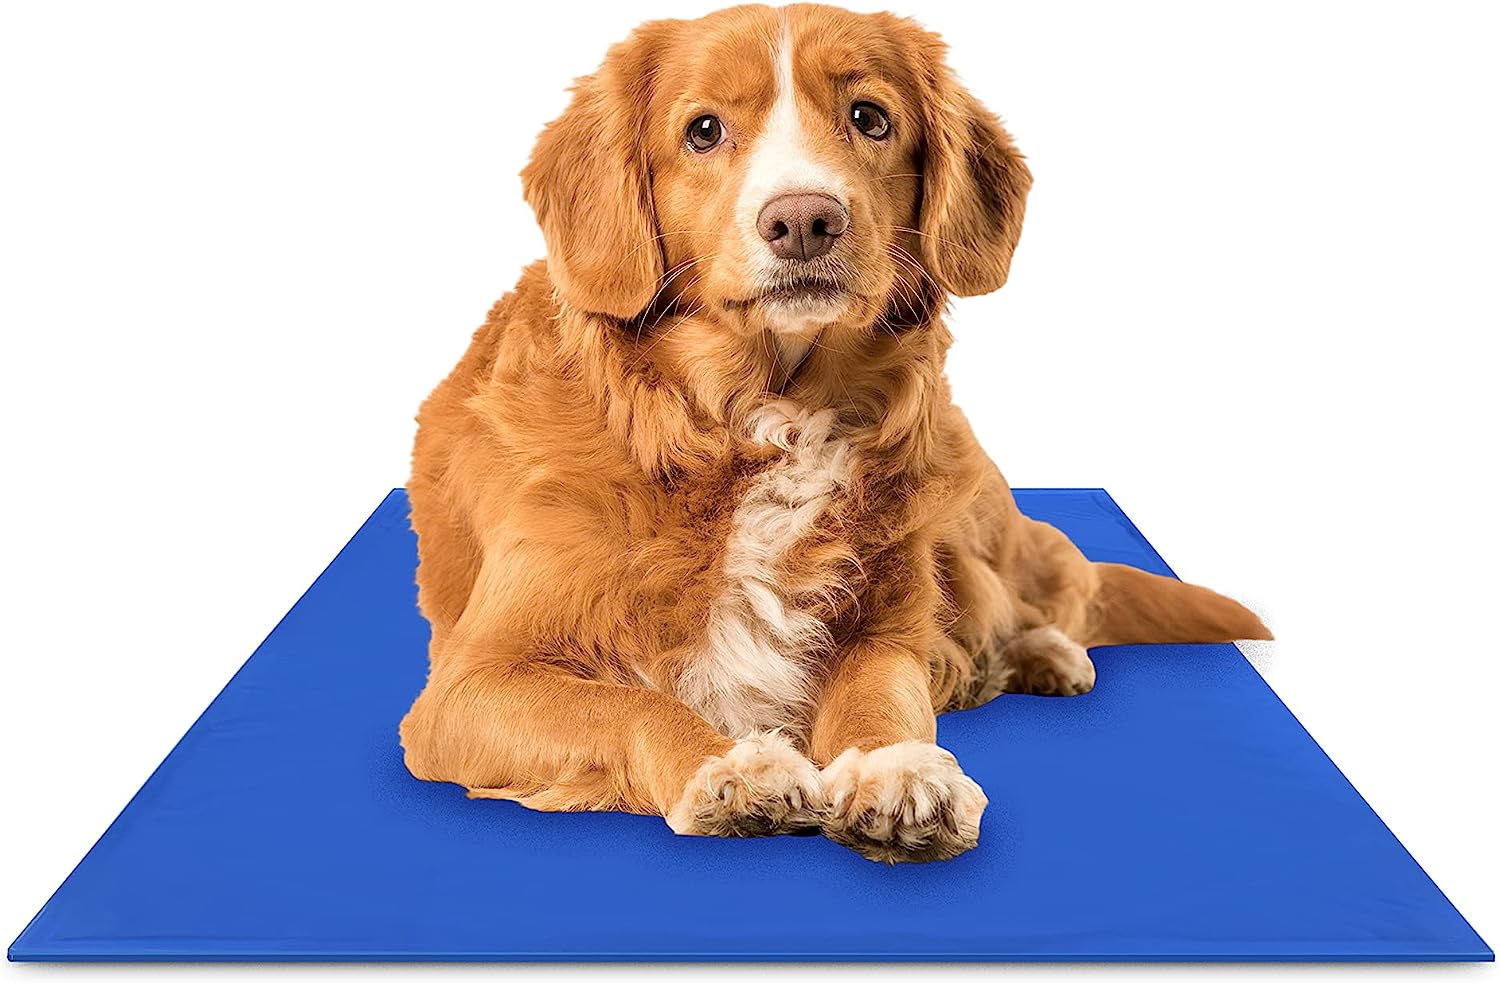 The 9 Best Cooling Pads for Dogs of 2023